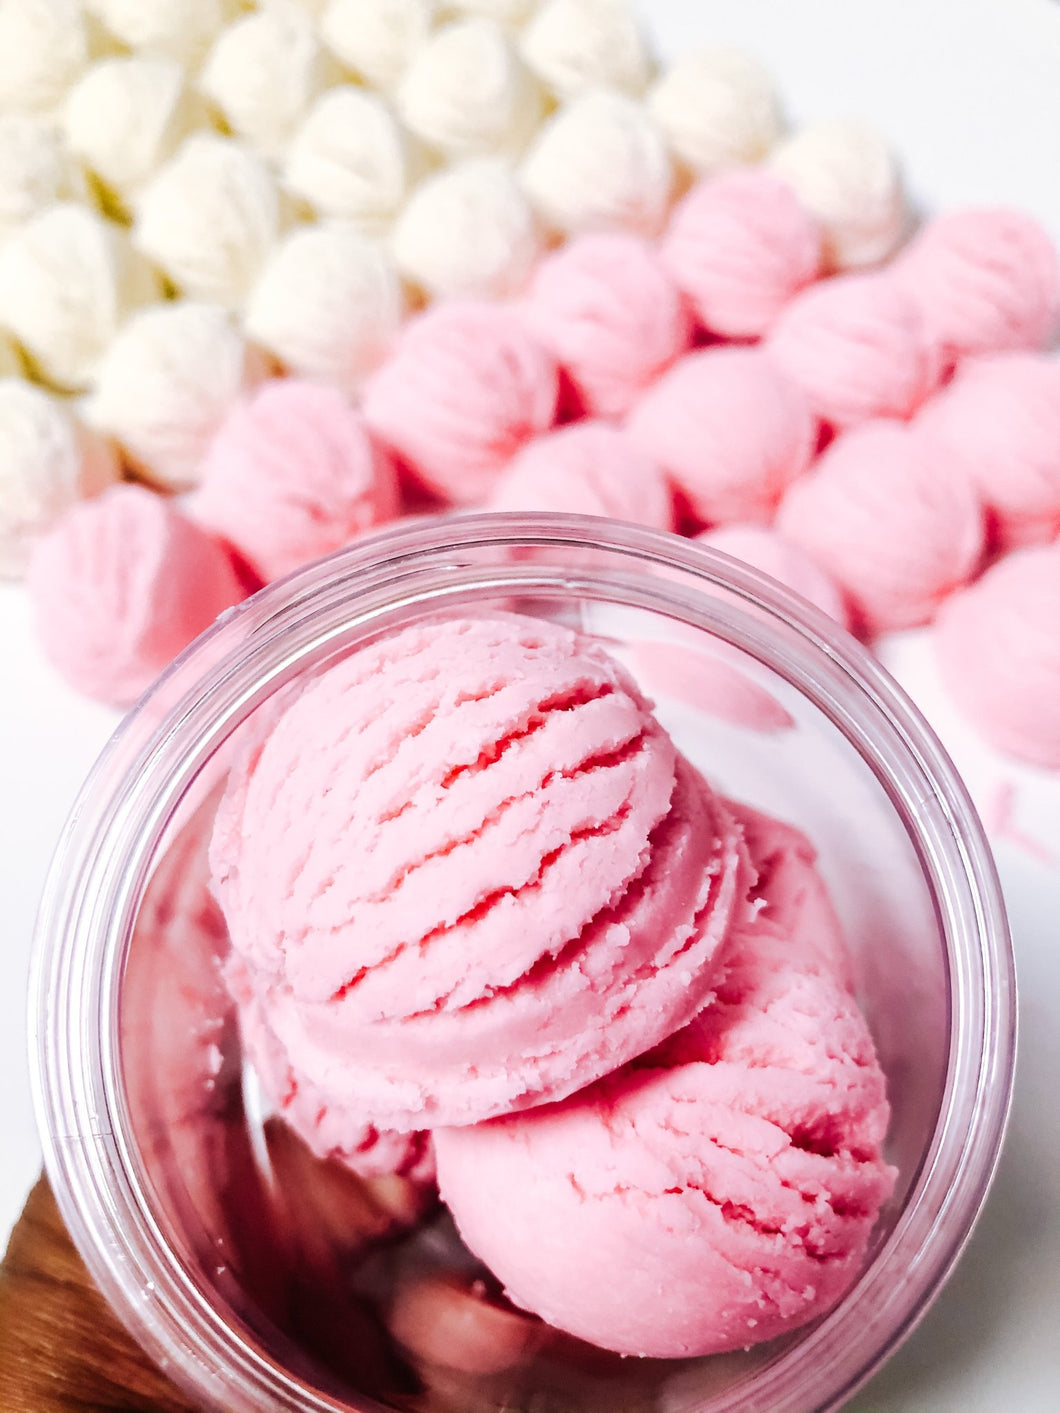 Wholesale Strawberry Scoops|Bath Truffles - Subtle and Wild